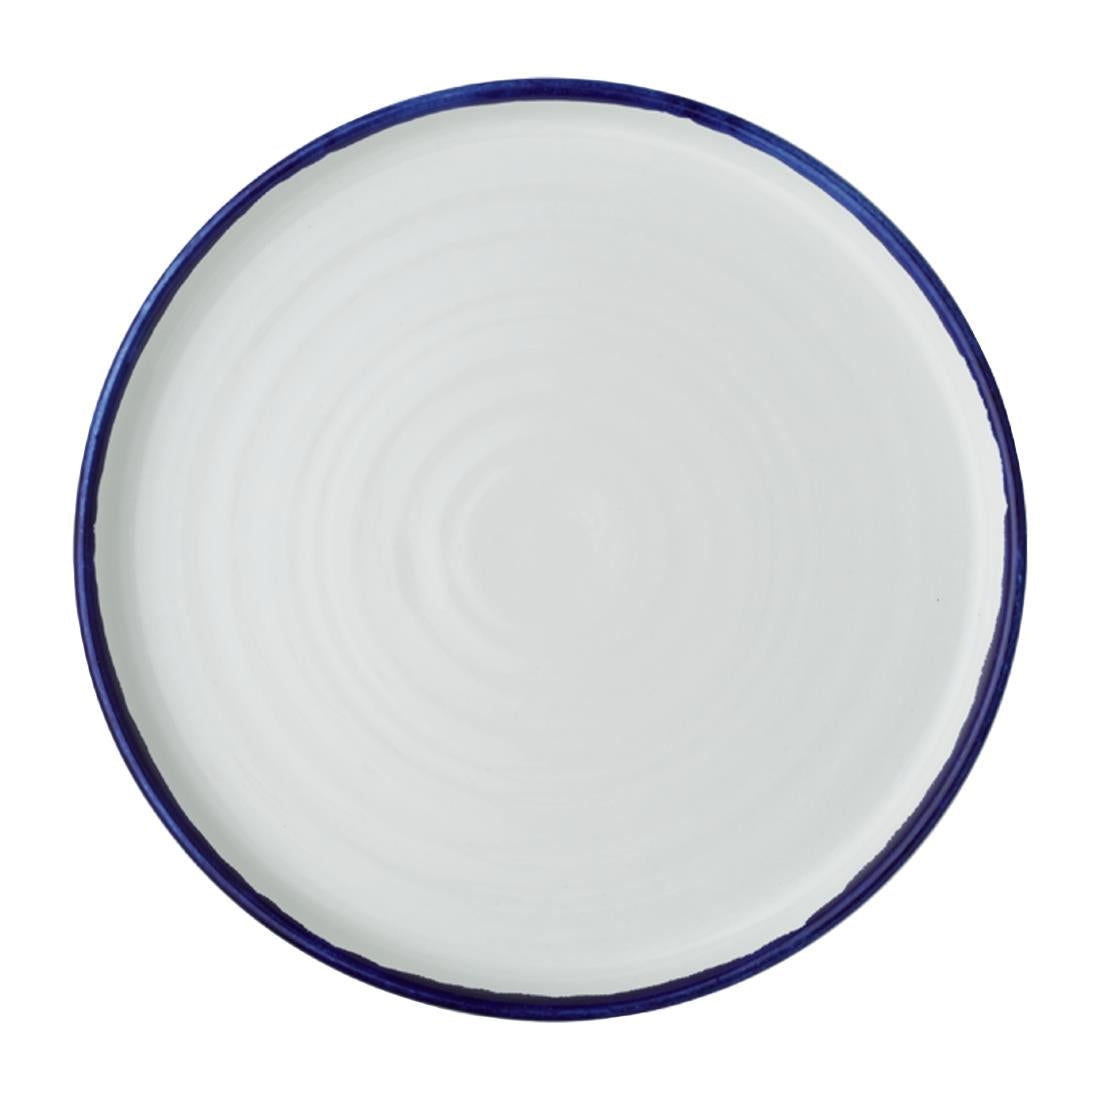 FX152 Dudson Harvest Walled Plates Ink 210mm (Pack of 6) JD Catering Equipment Solutions Ltd